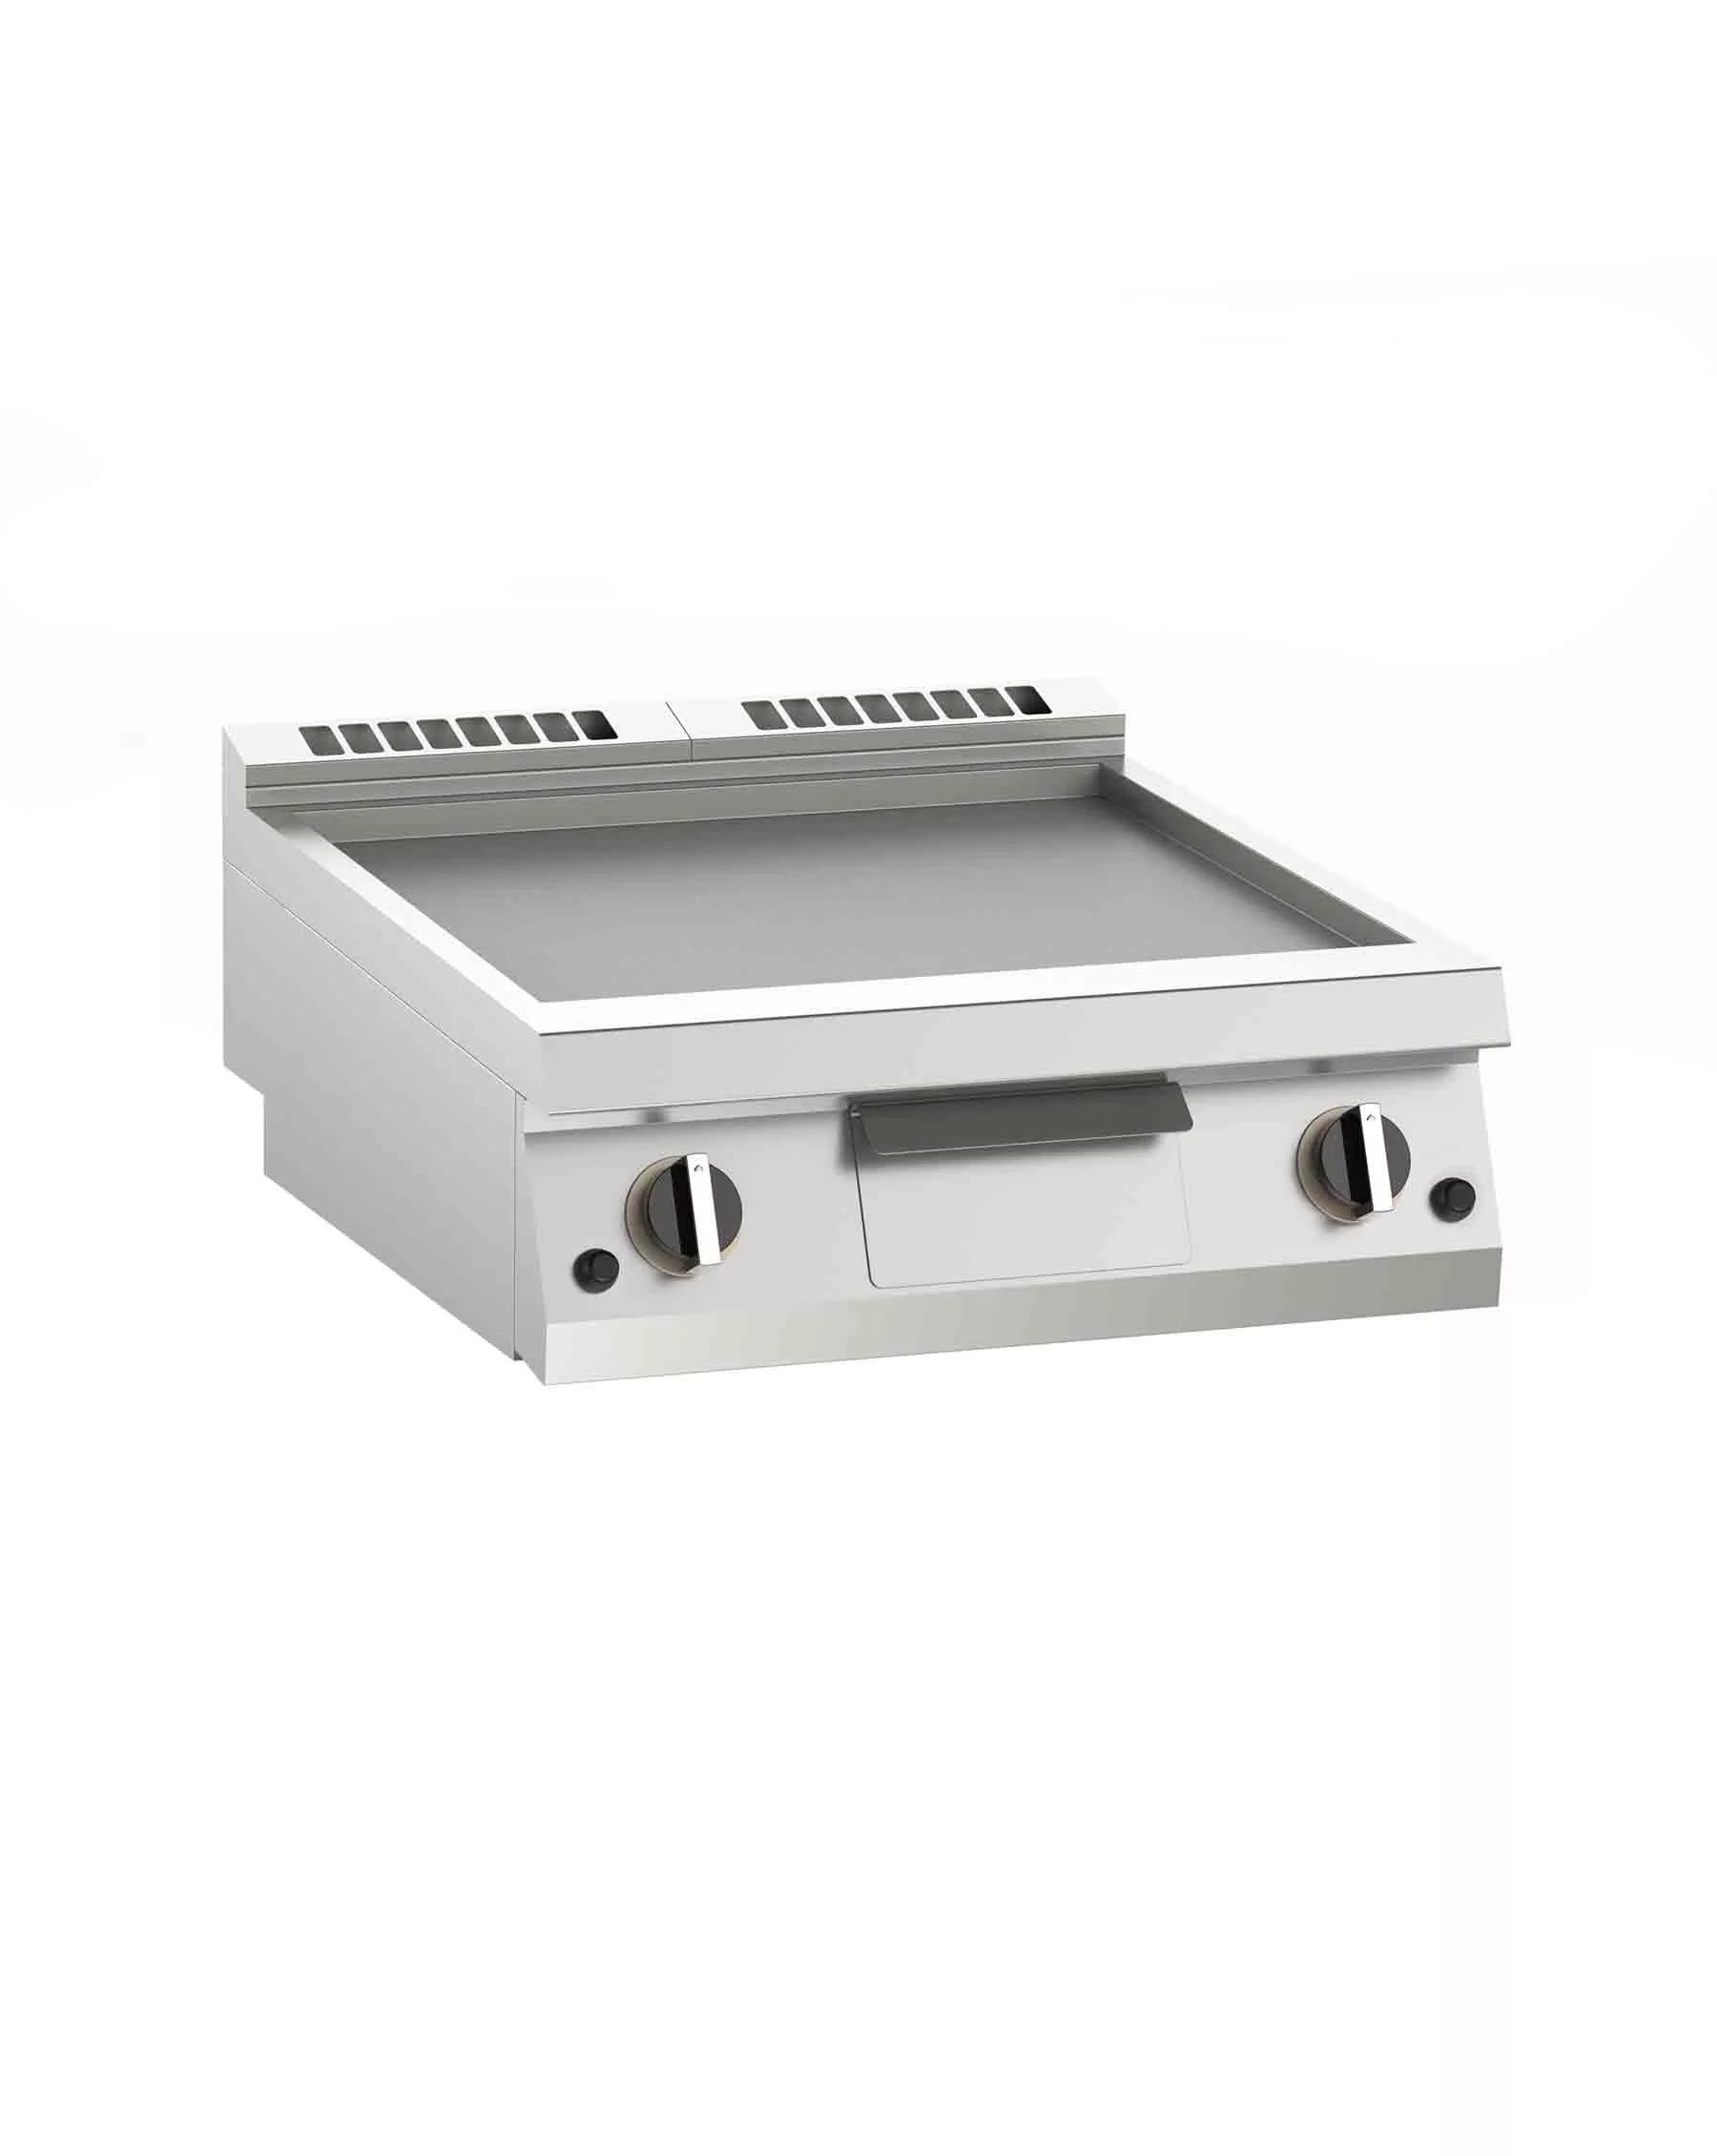 gas griddle with smooth plate